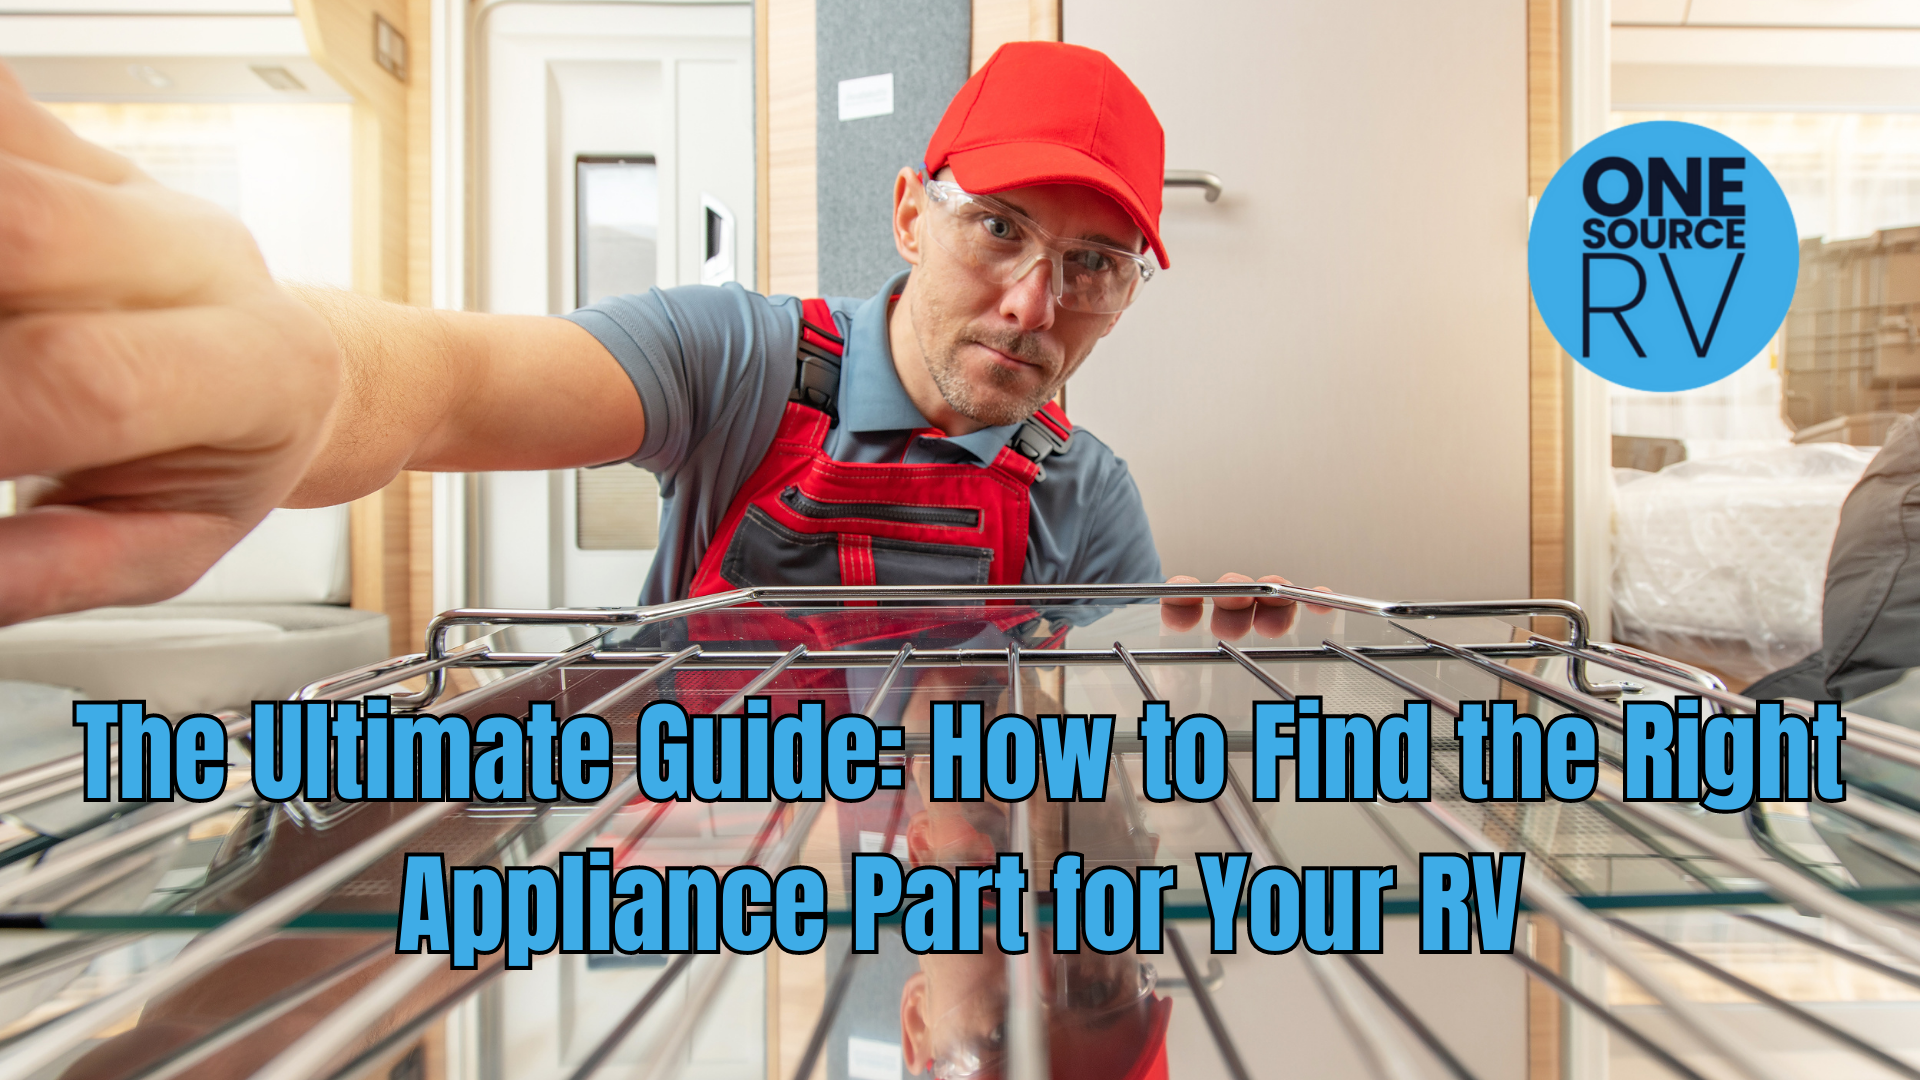 The Ultimate Guide: How to Find the Right Appliance Part for Your RV